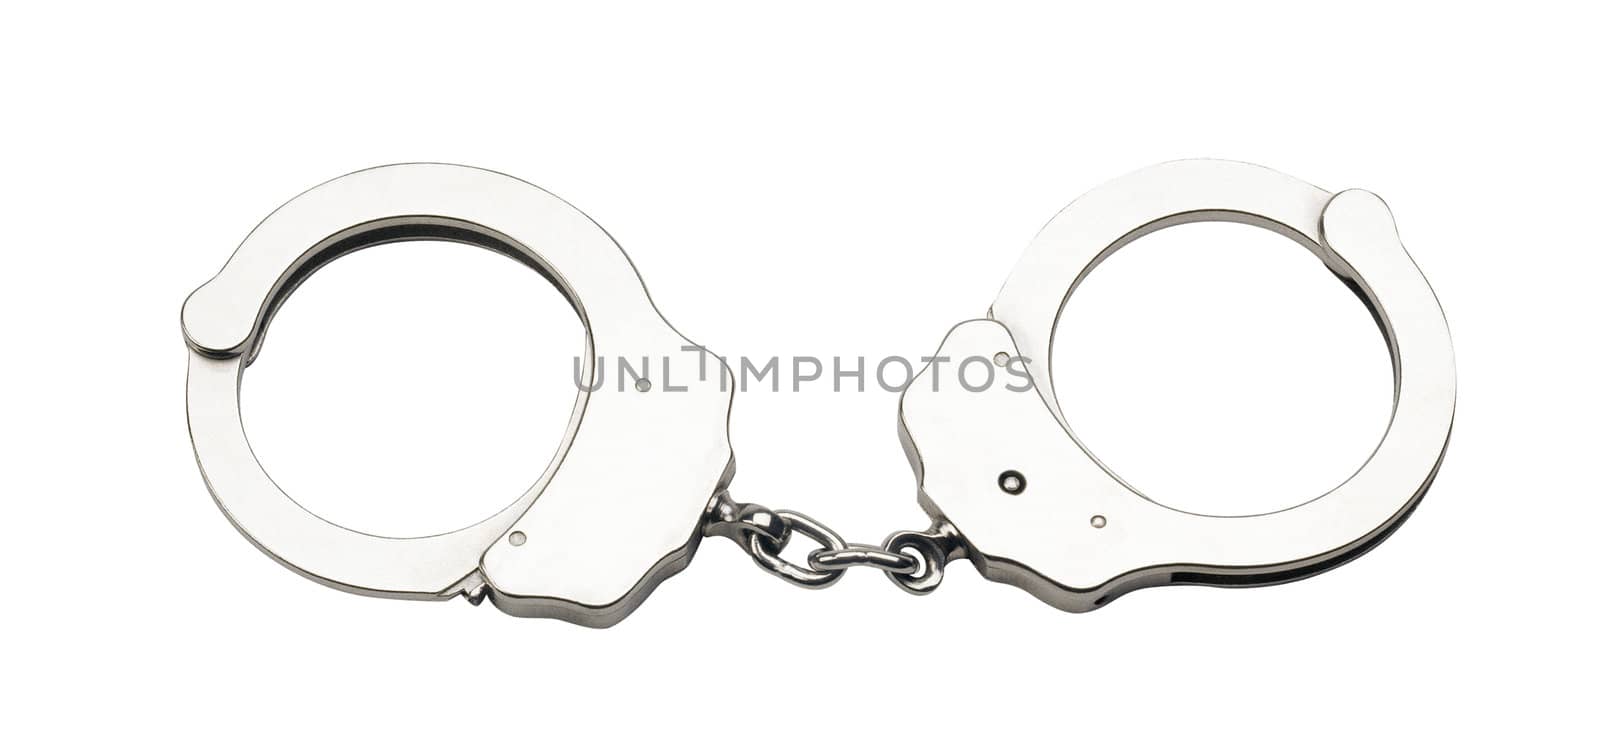 Metal handcuffs for hands on a white background by ozaiachin